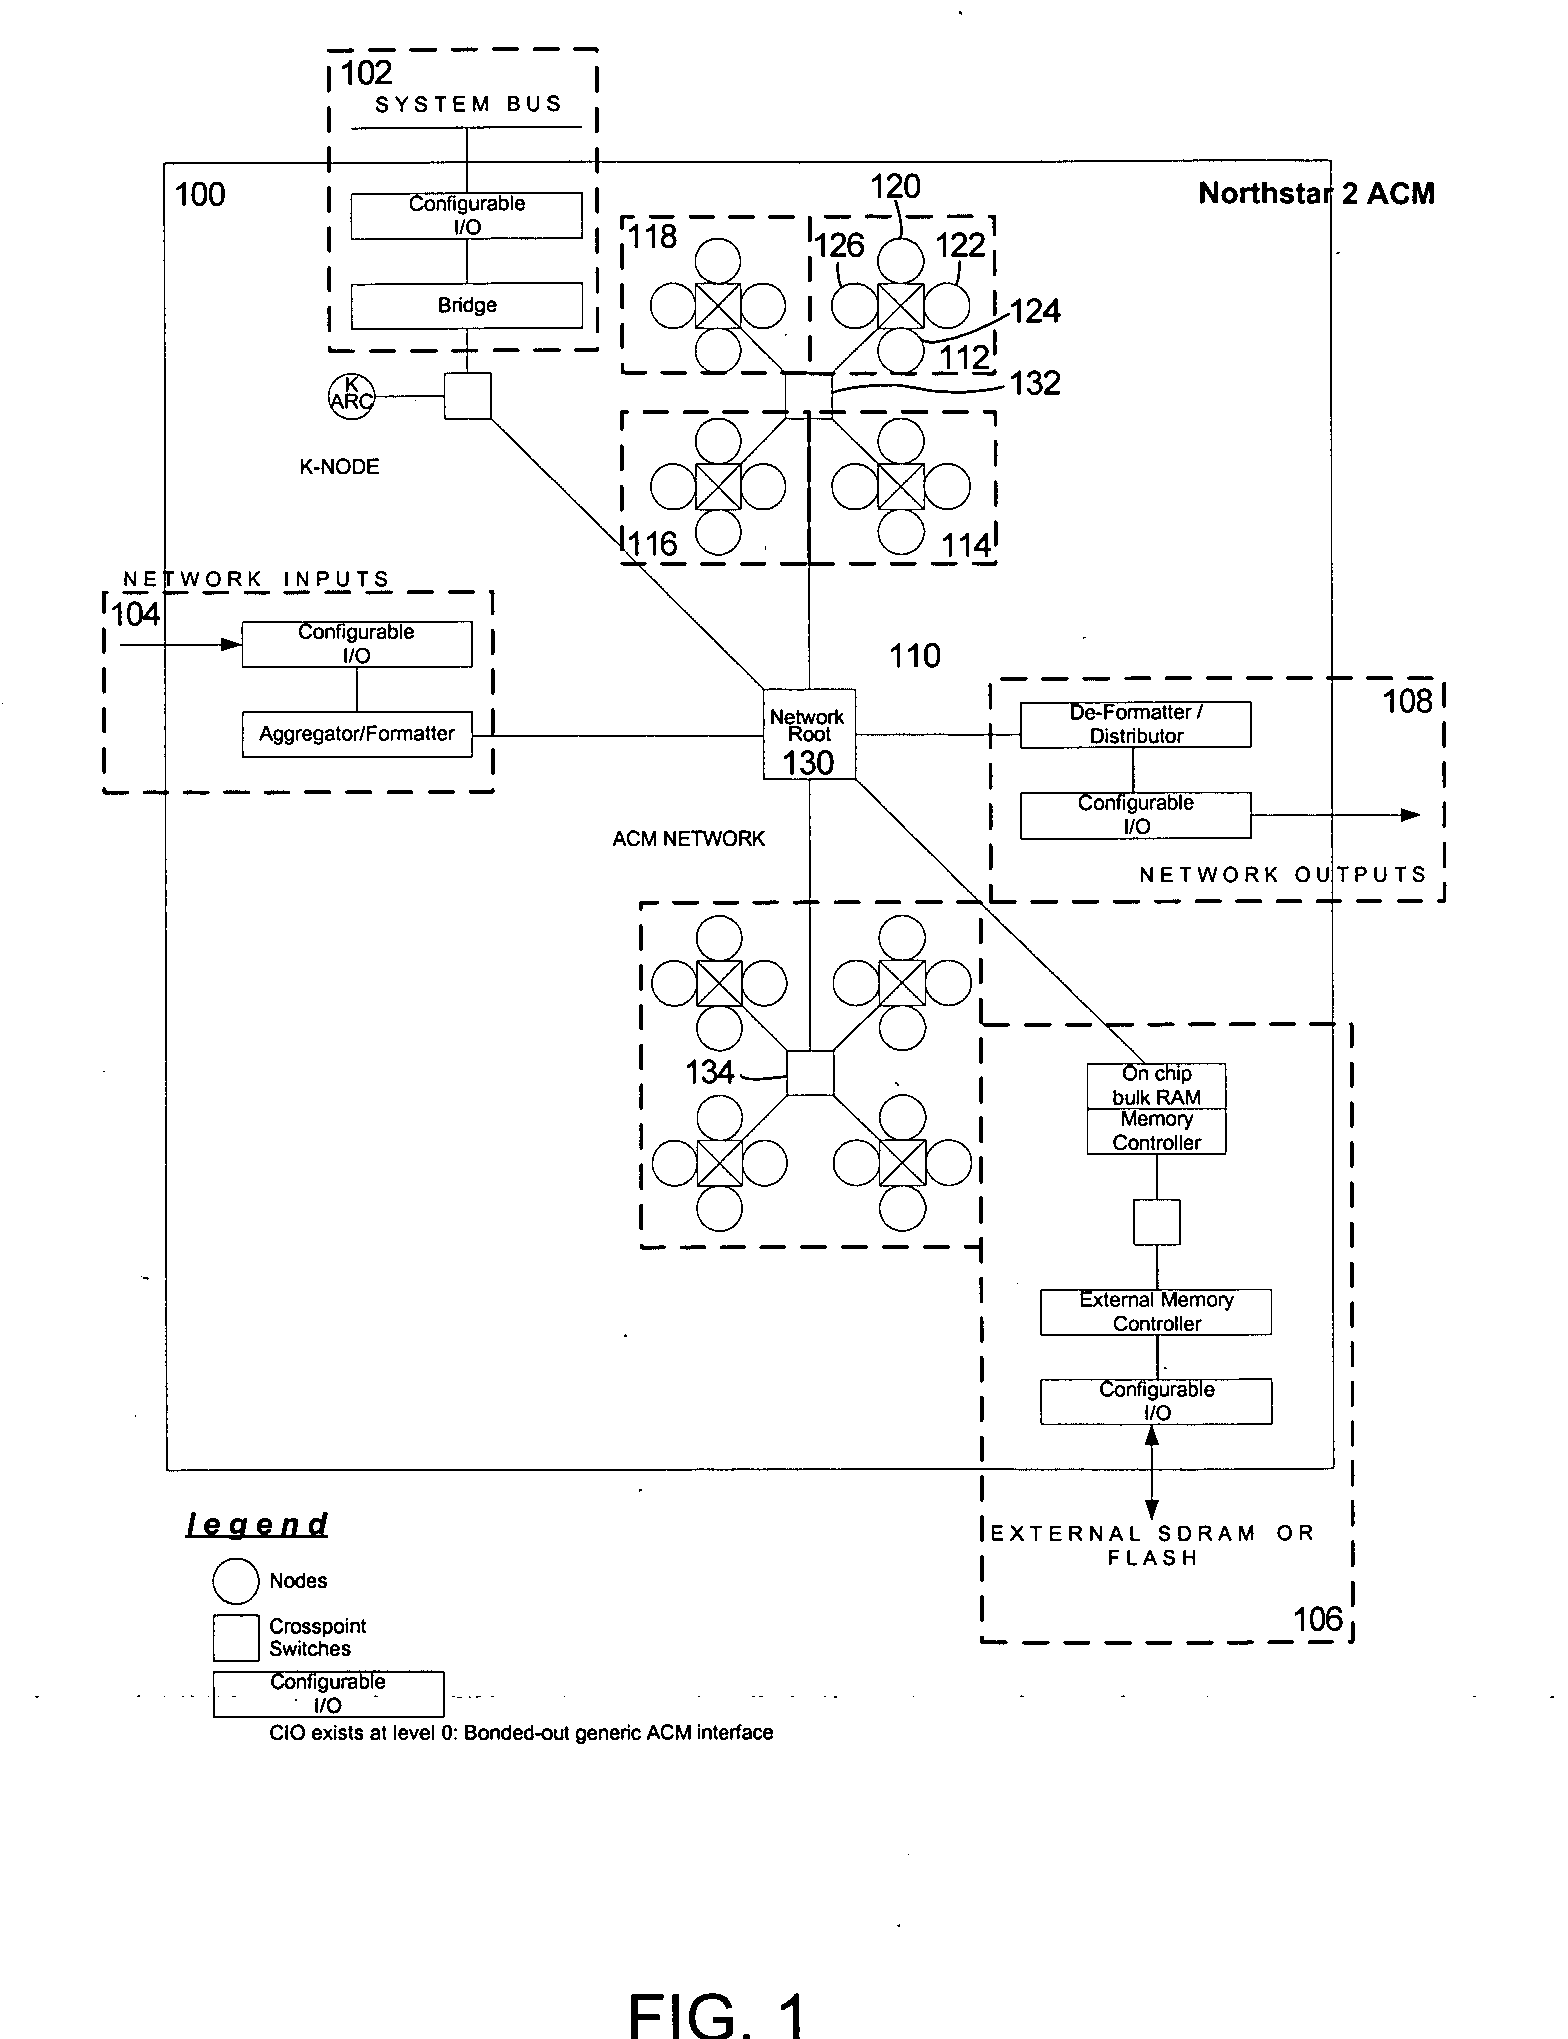 Arithmetic node including general digital signal processing functions for an adaptive computing machine